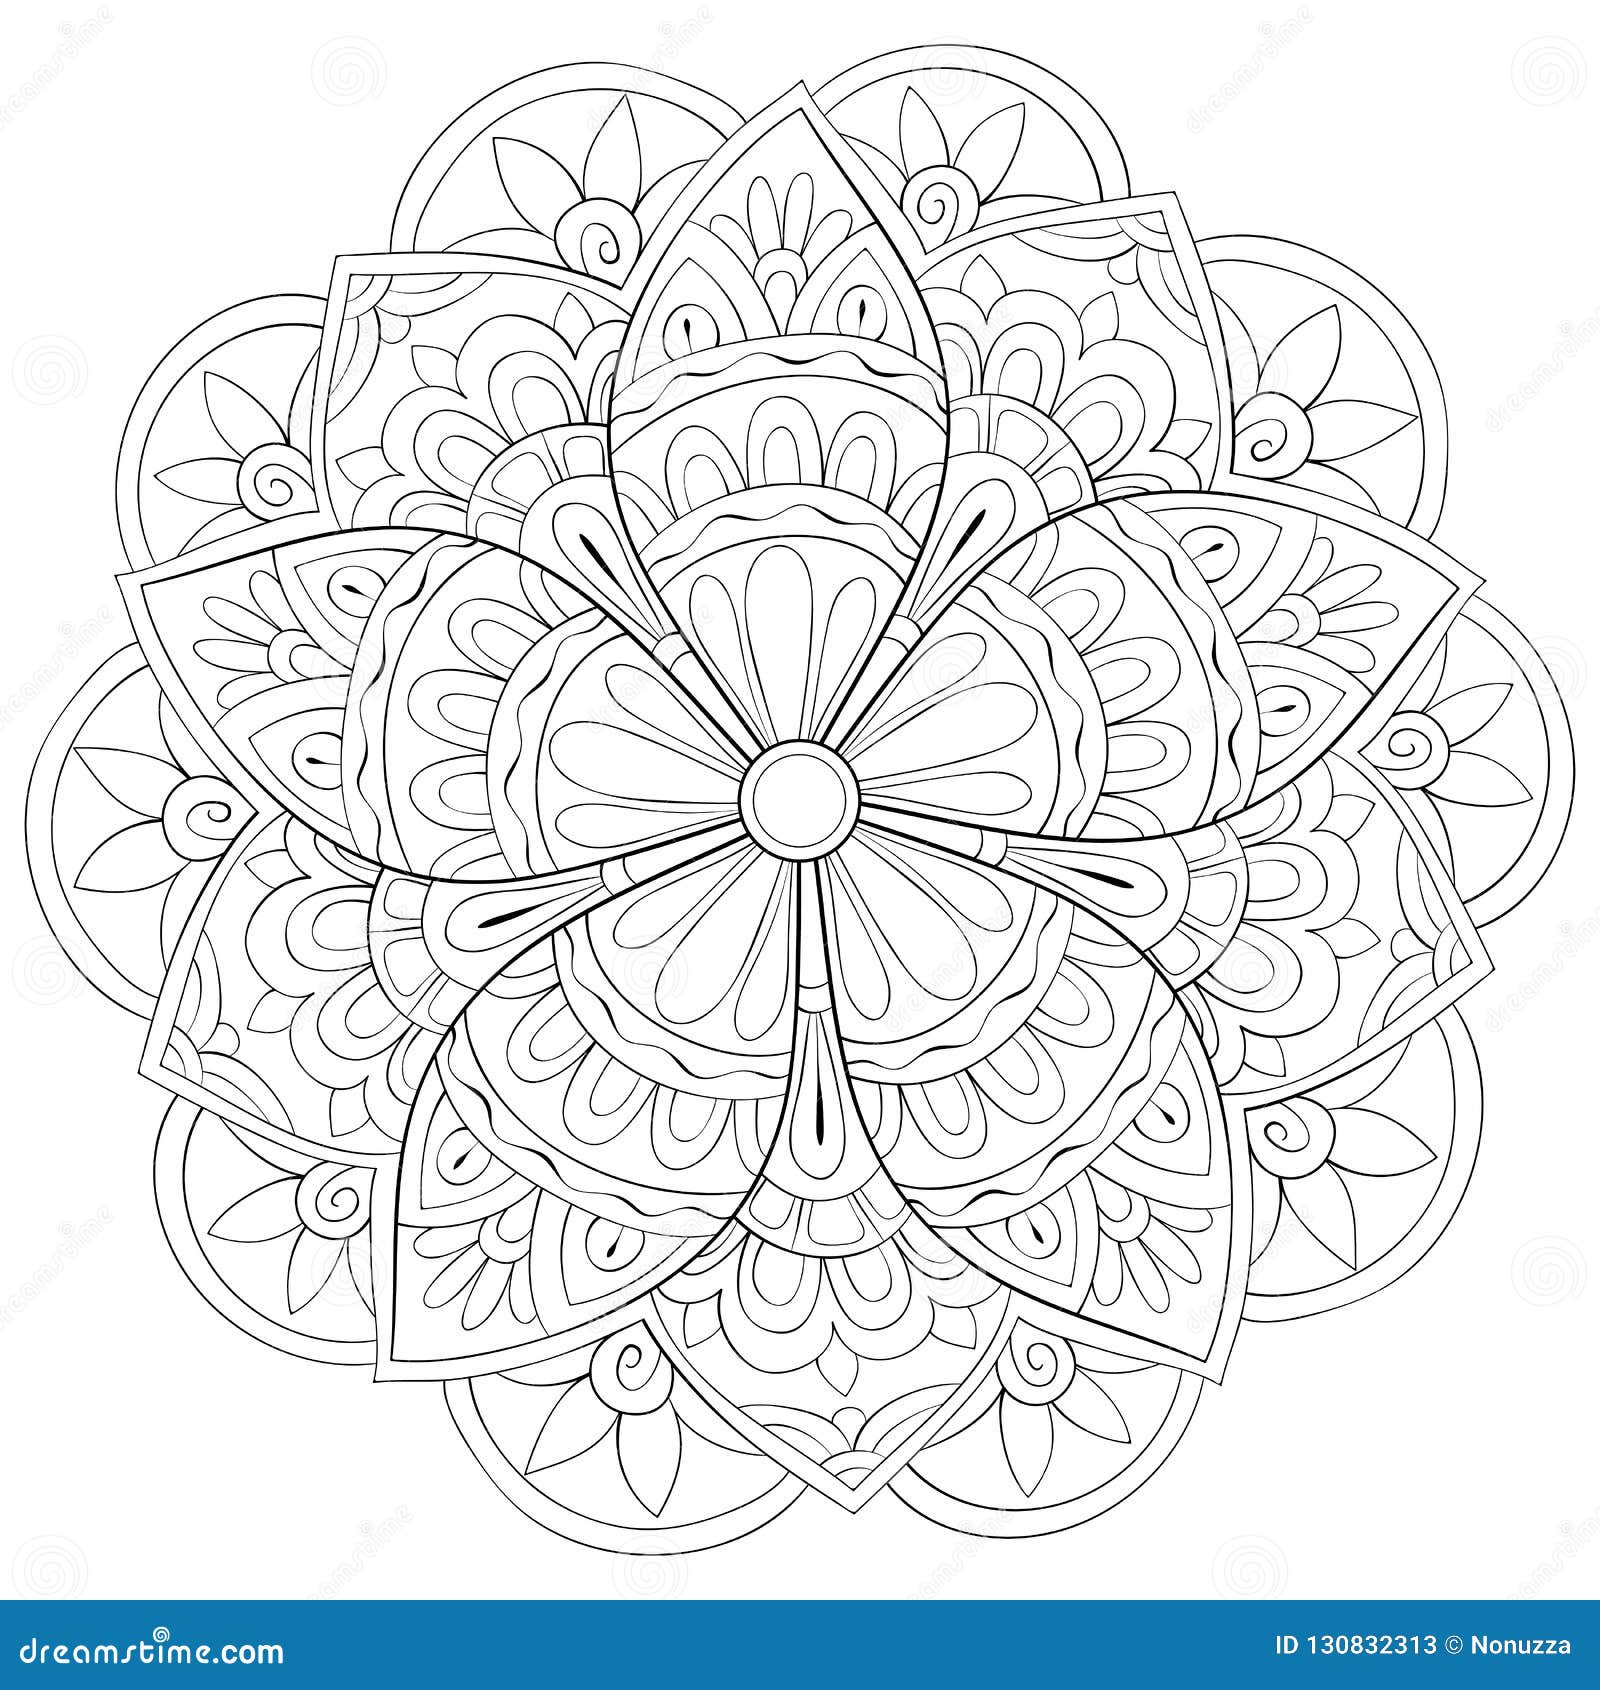 Magnificent Mandalas Adult Coloring Book - Mandala Meditation for Adults Relaxation and Stress Relief: Zen and the Art of Coloring Yourself Calm Adult ... 5 Zen & the Art of Coloring Yourself Calm 